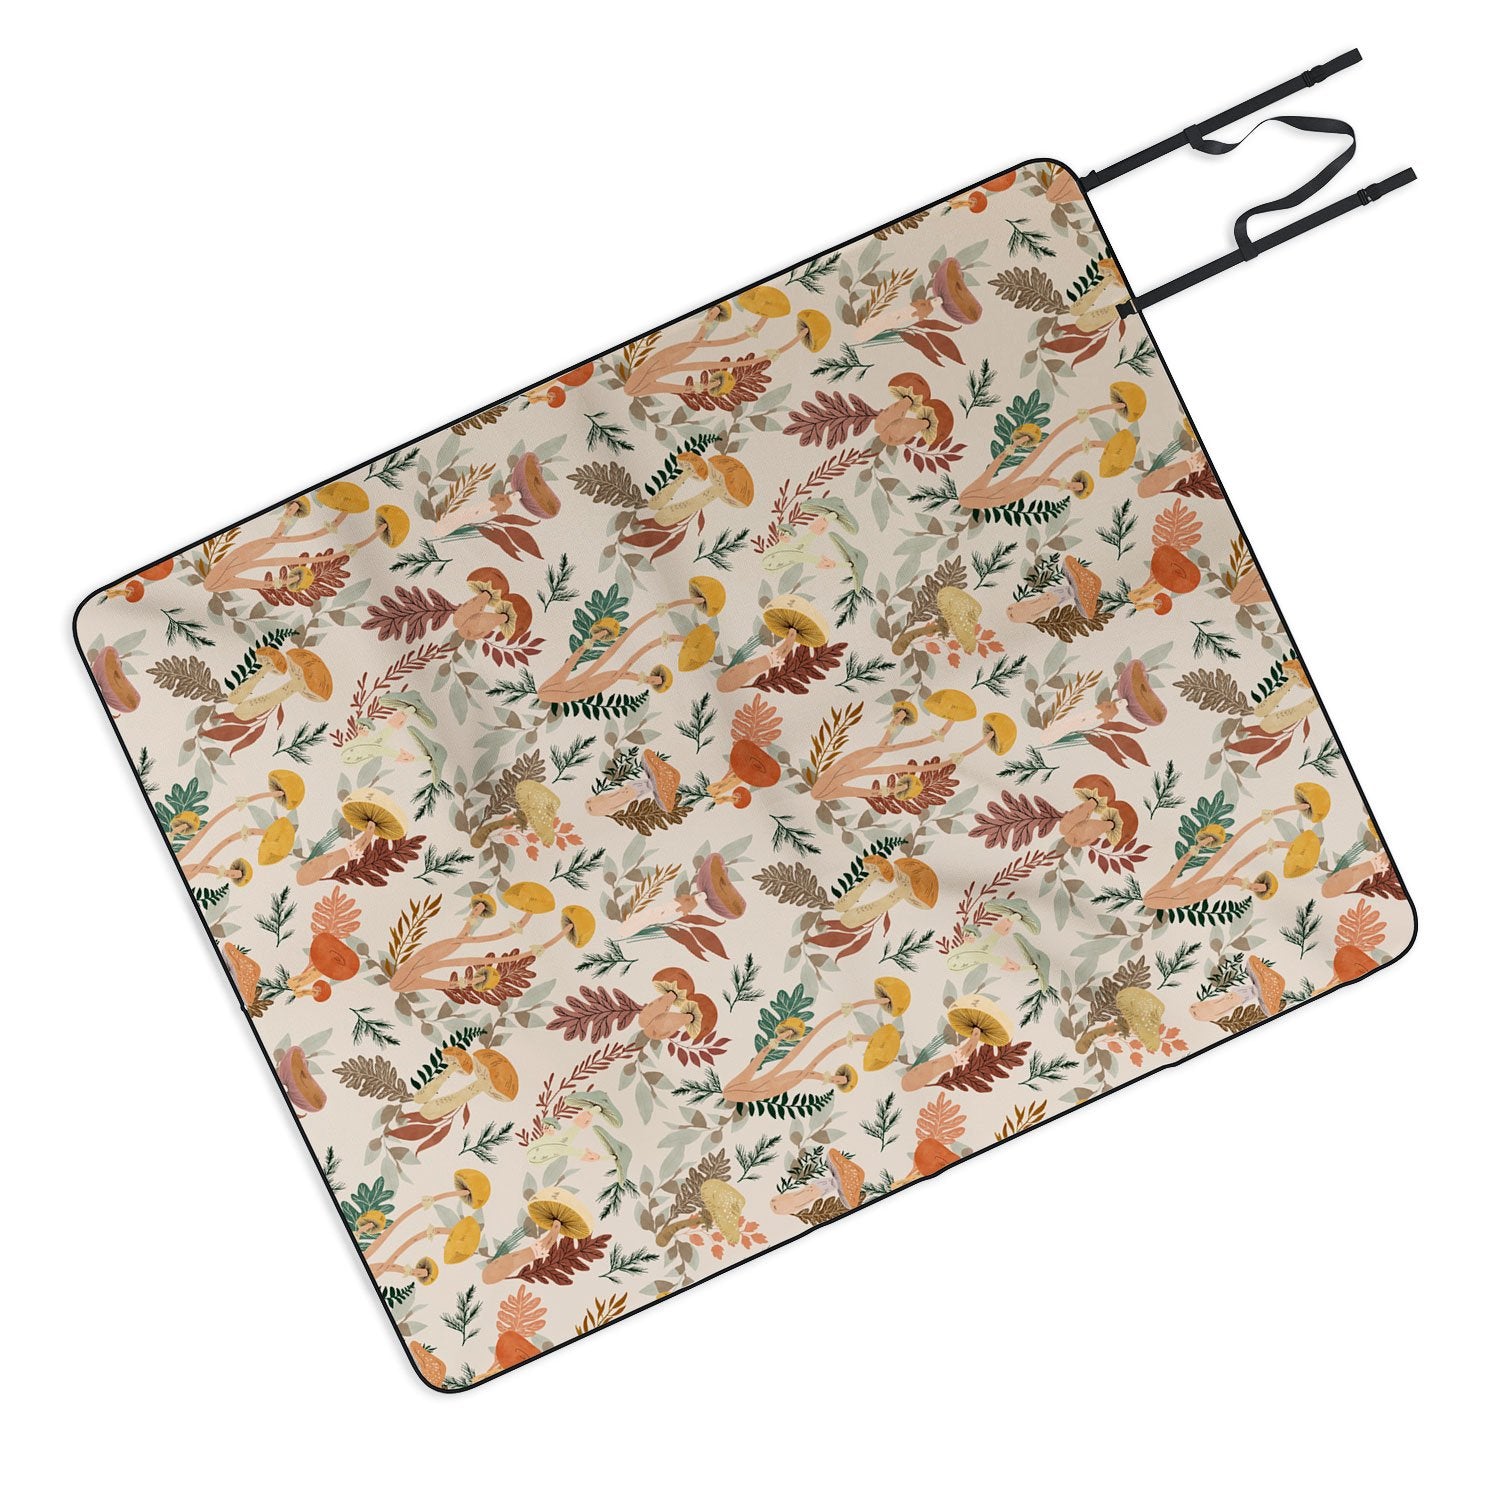 "Ole Colorful Mushrooms" Picnic Blanket (DS)